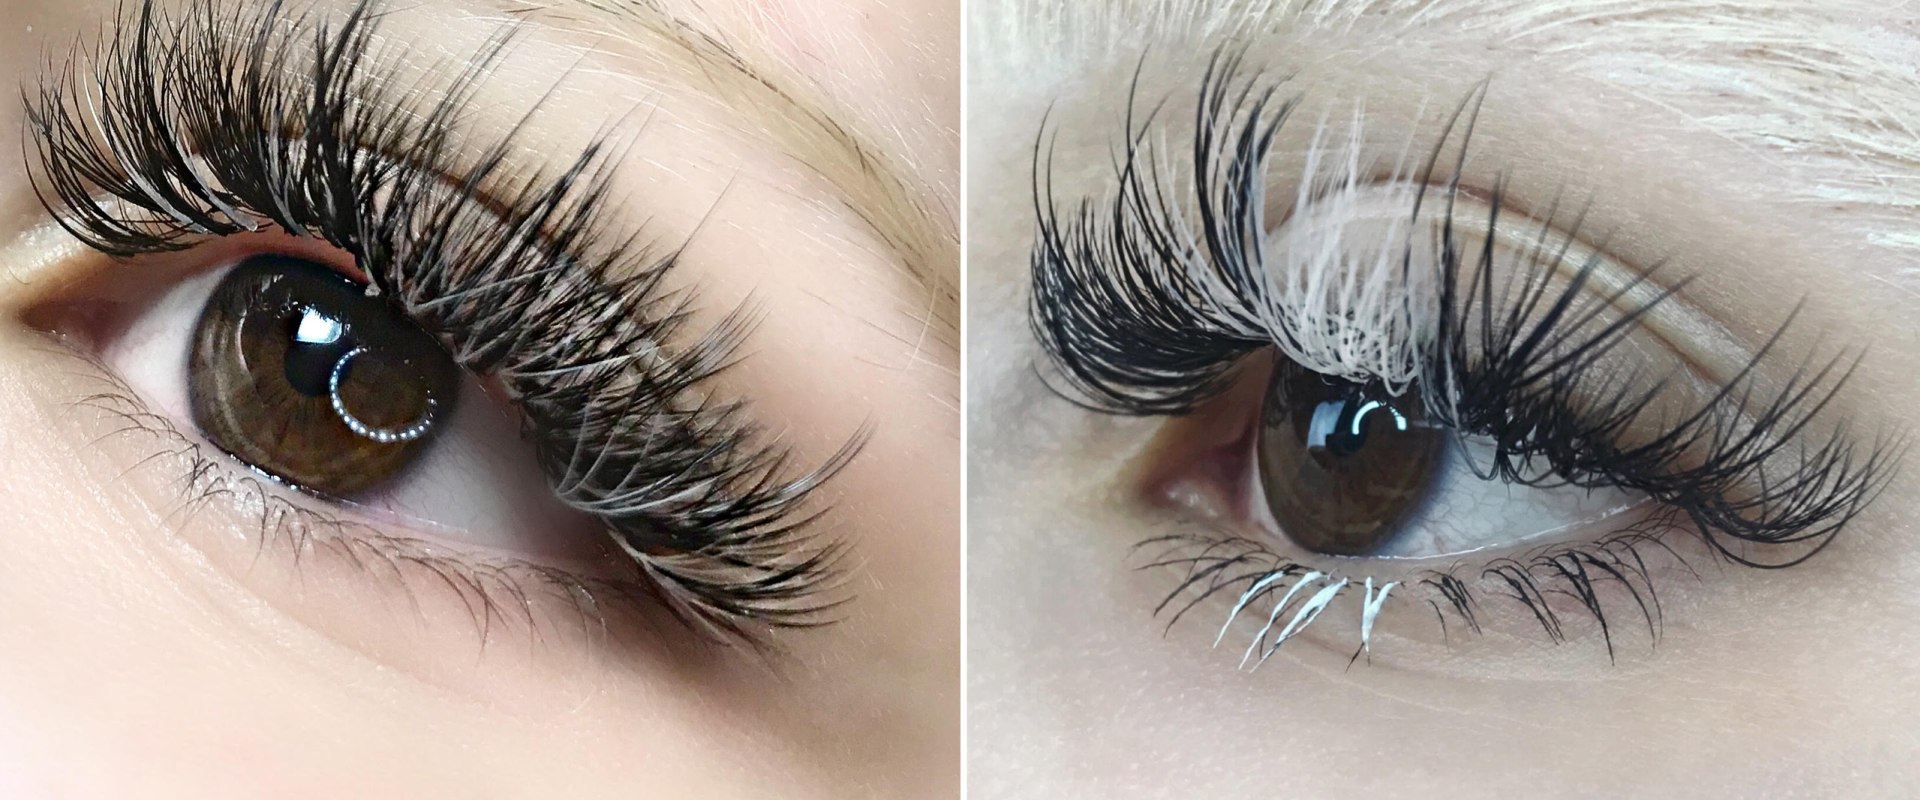 Tips when getting eyelash extensions?